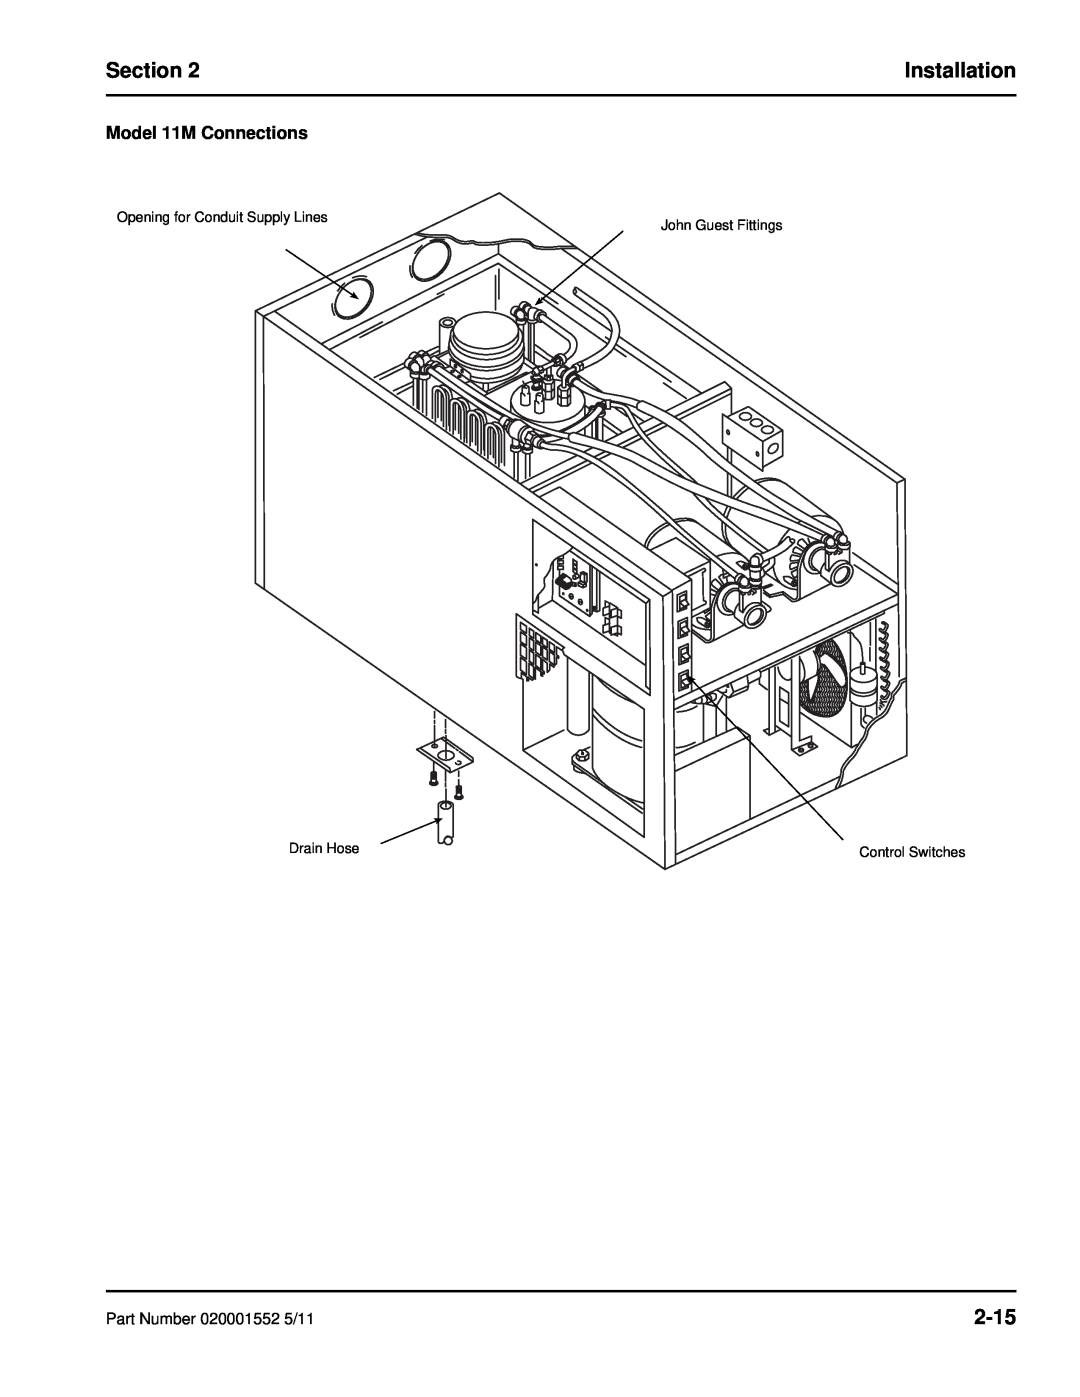 Manitowoc Ice manual 2-15, Model 11M Connections, Section, Installation, Control Switches 